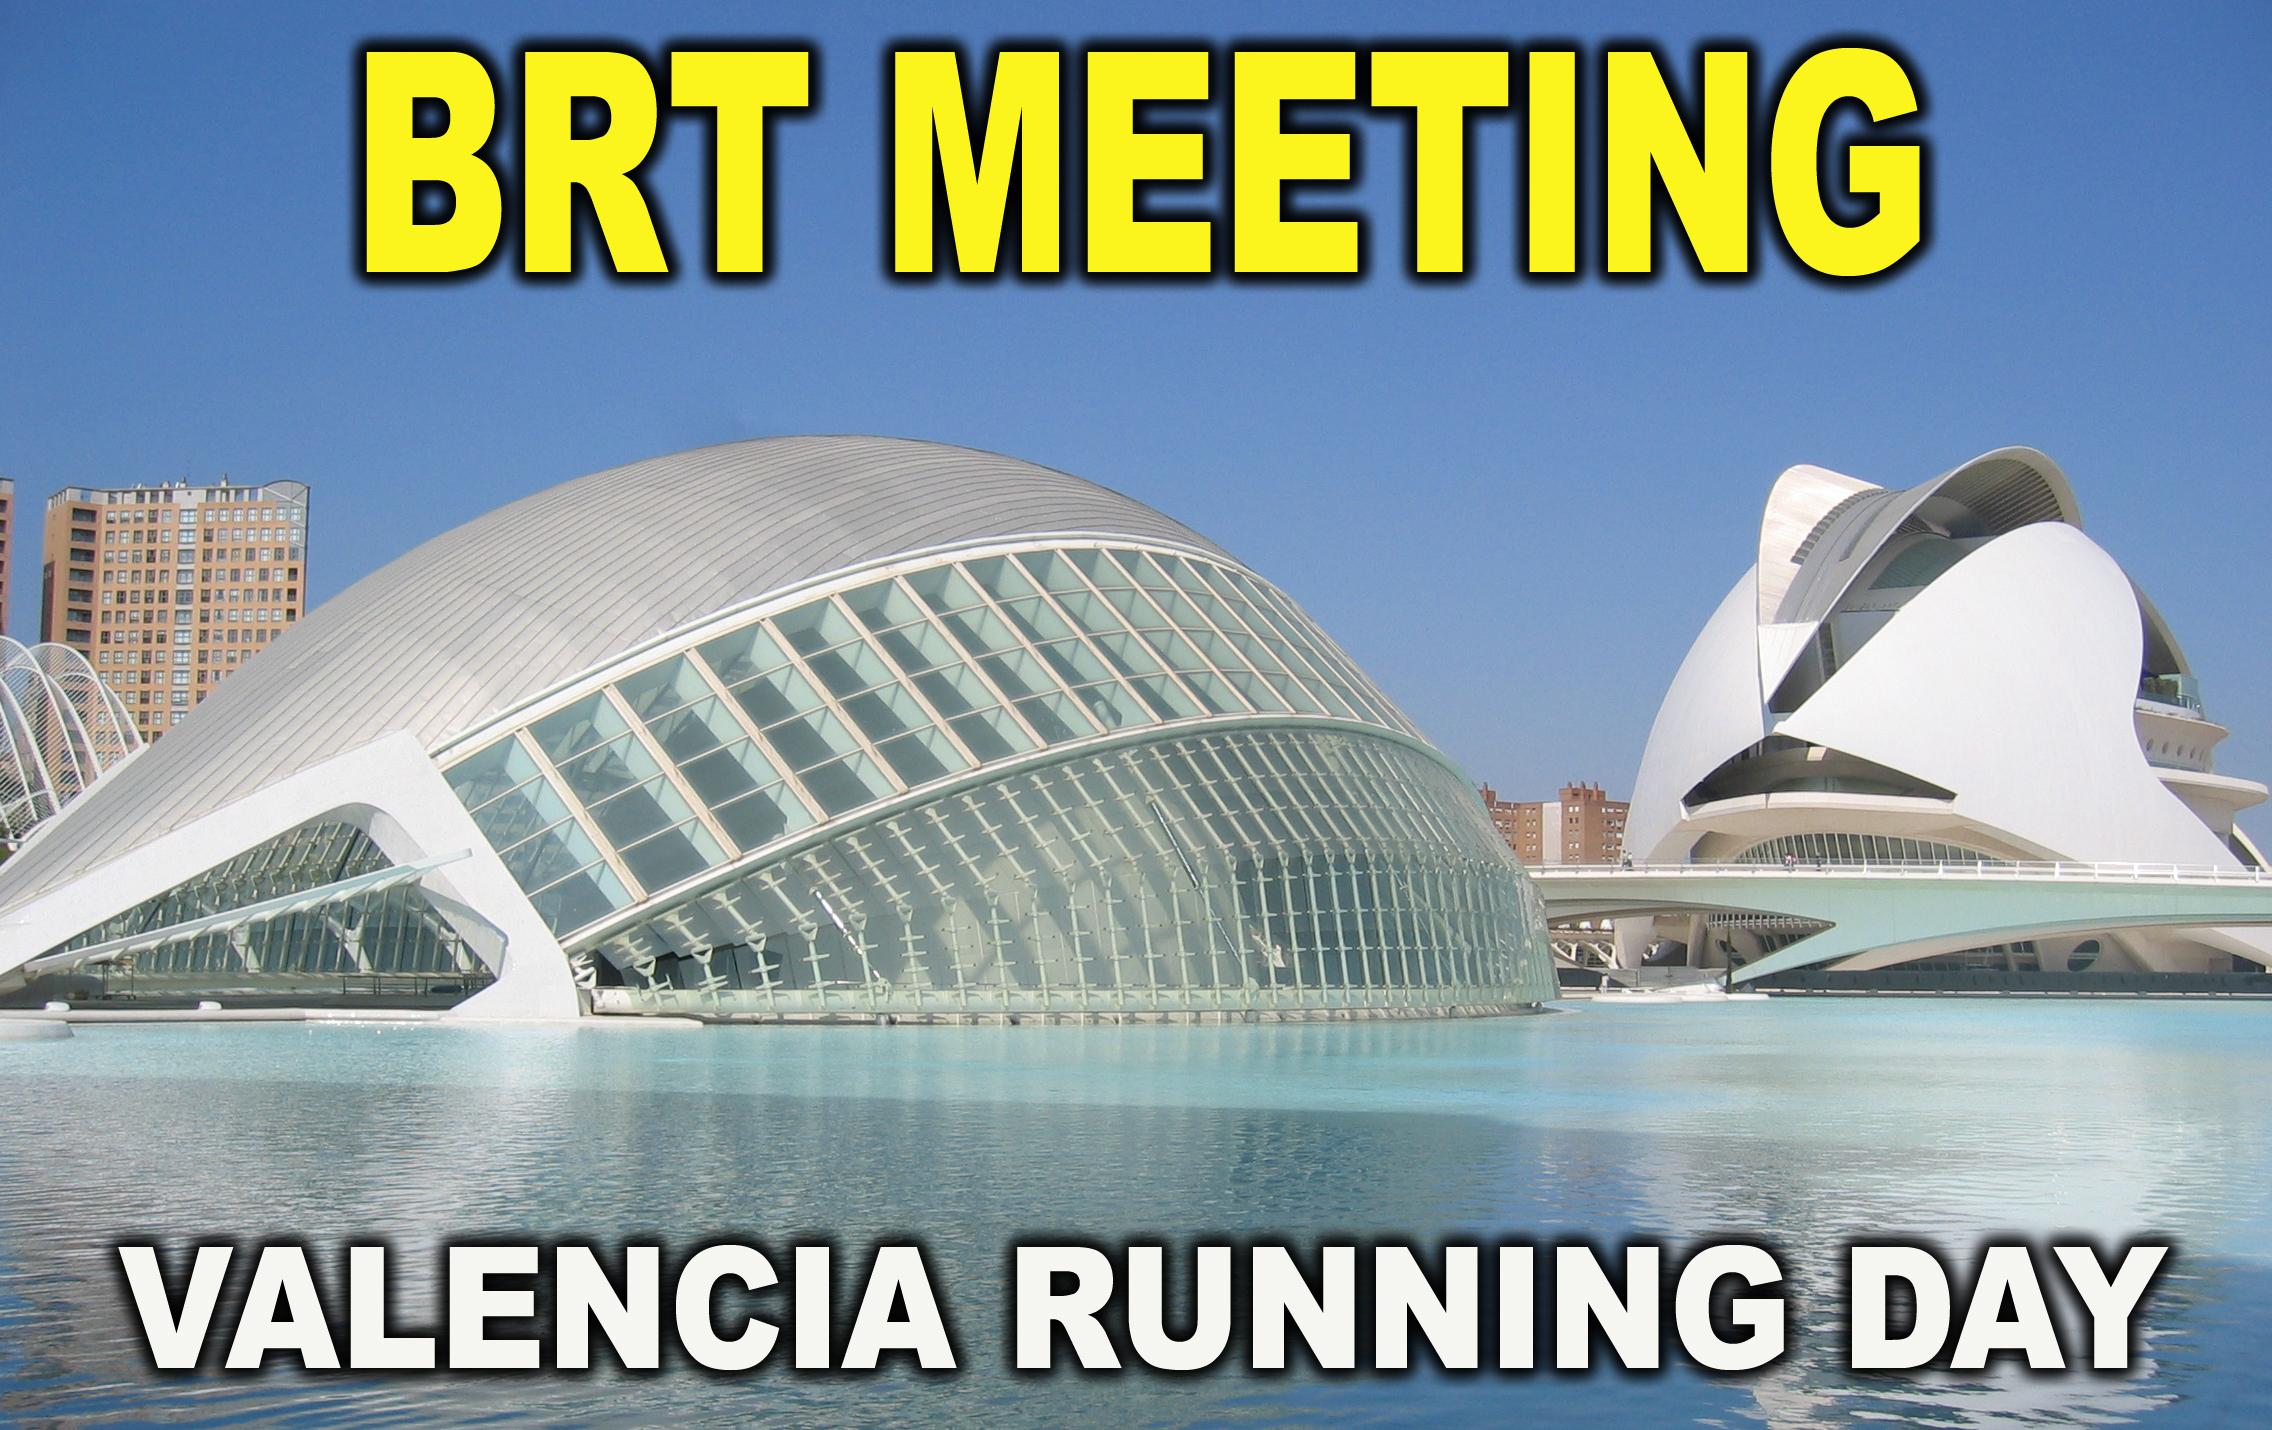 The Breaking Down Limits Factors - Factor Nine - Hydration - Training Week - Turn and Face The Real Facts - BRT Meeting - Valencia Running Day